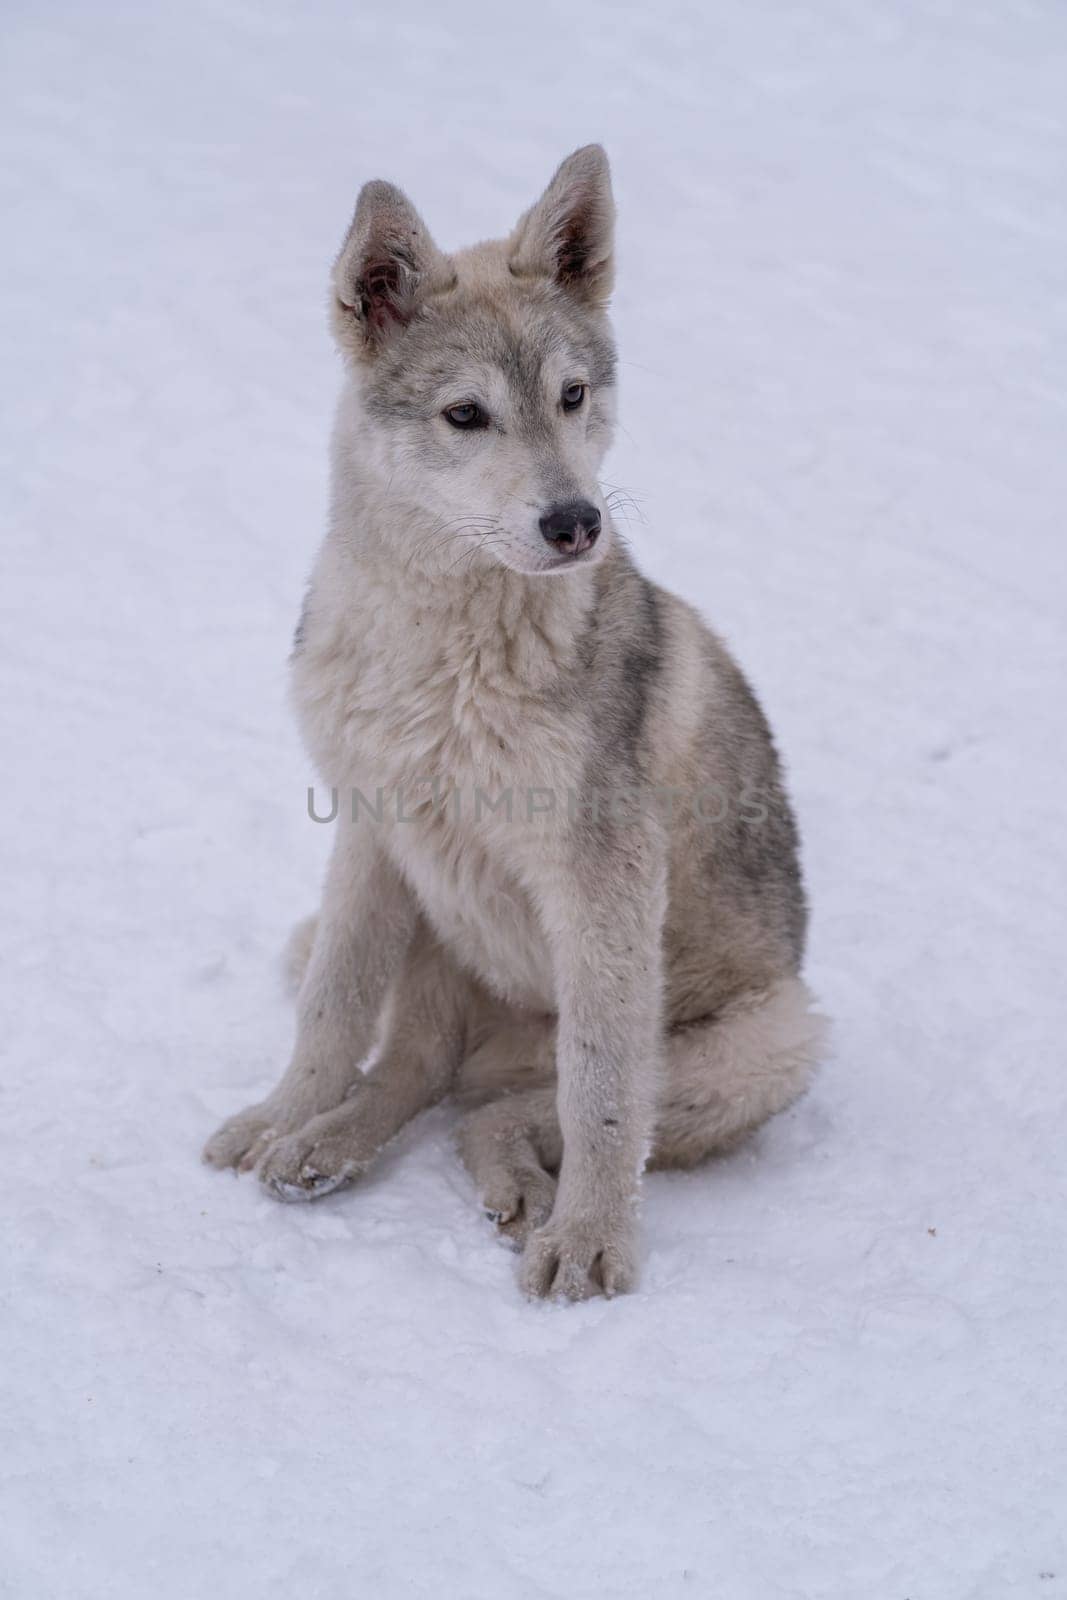 Stray beautiful dog in the snow on a cold winter day. Stray dog with sad eyes. Stray animals, social problems, safety,